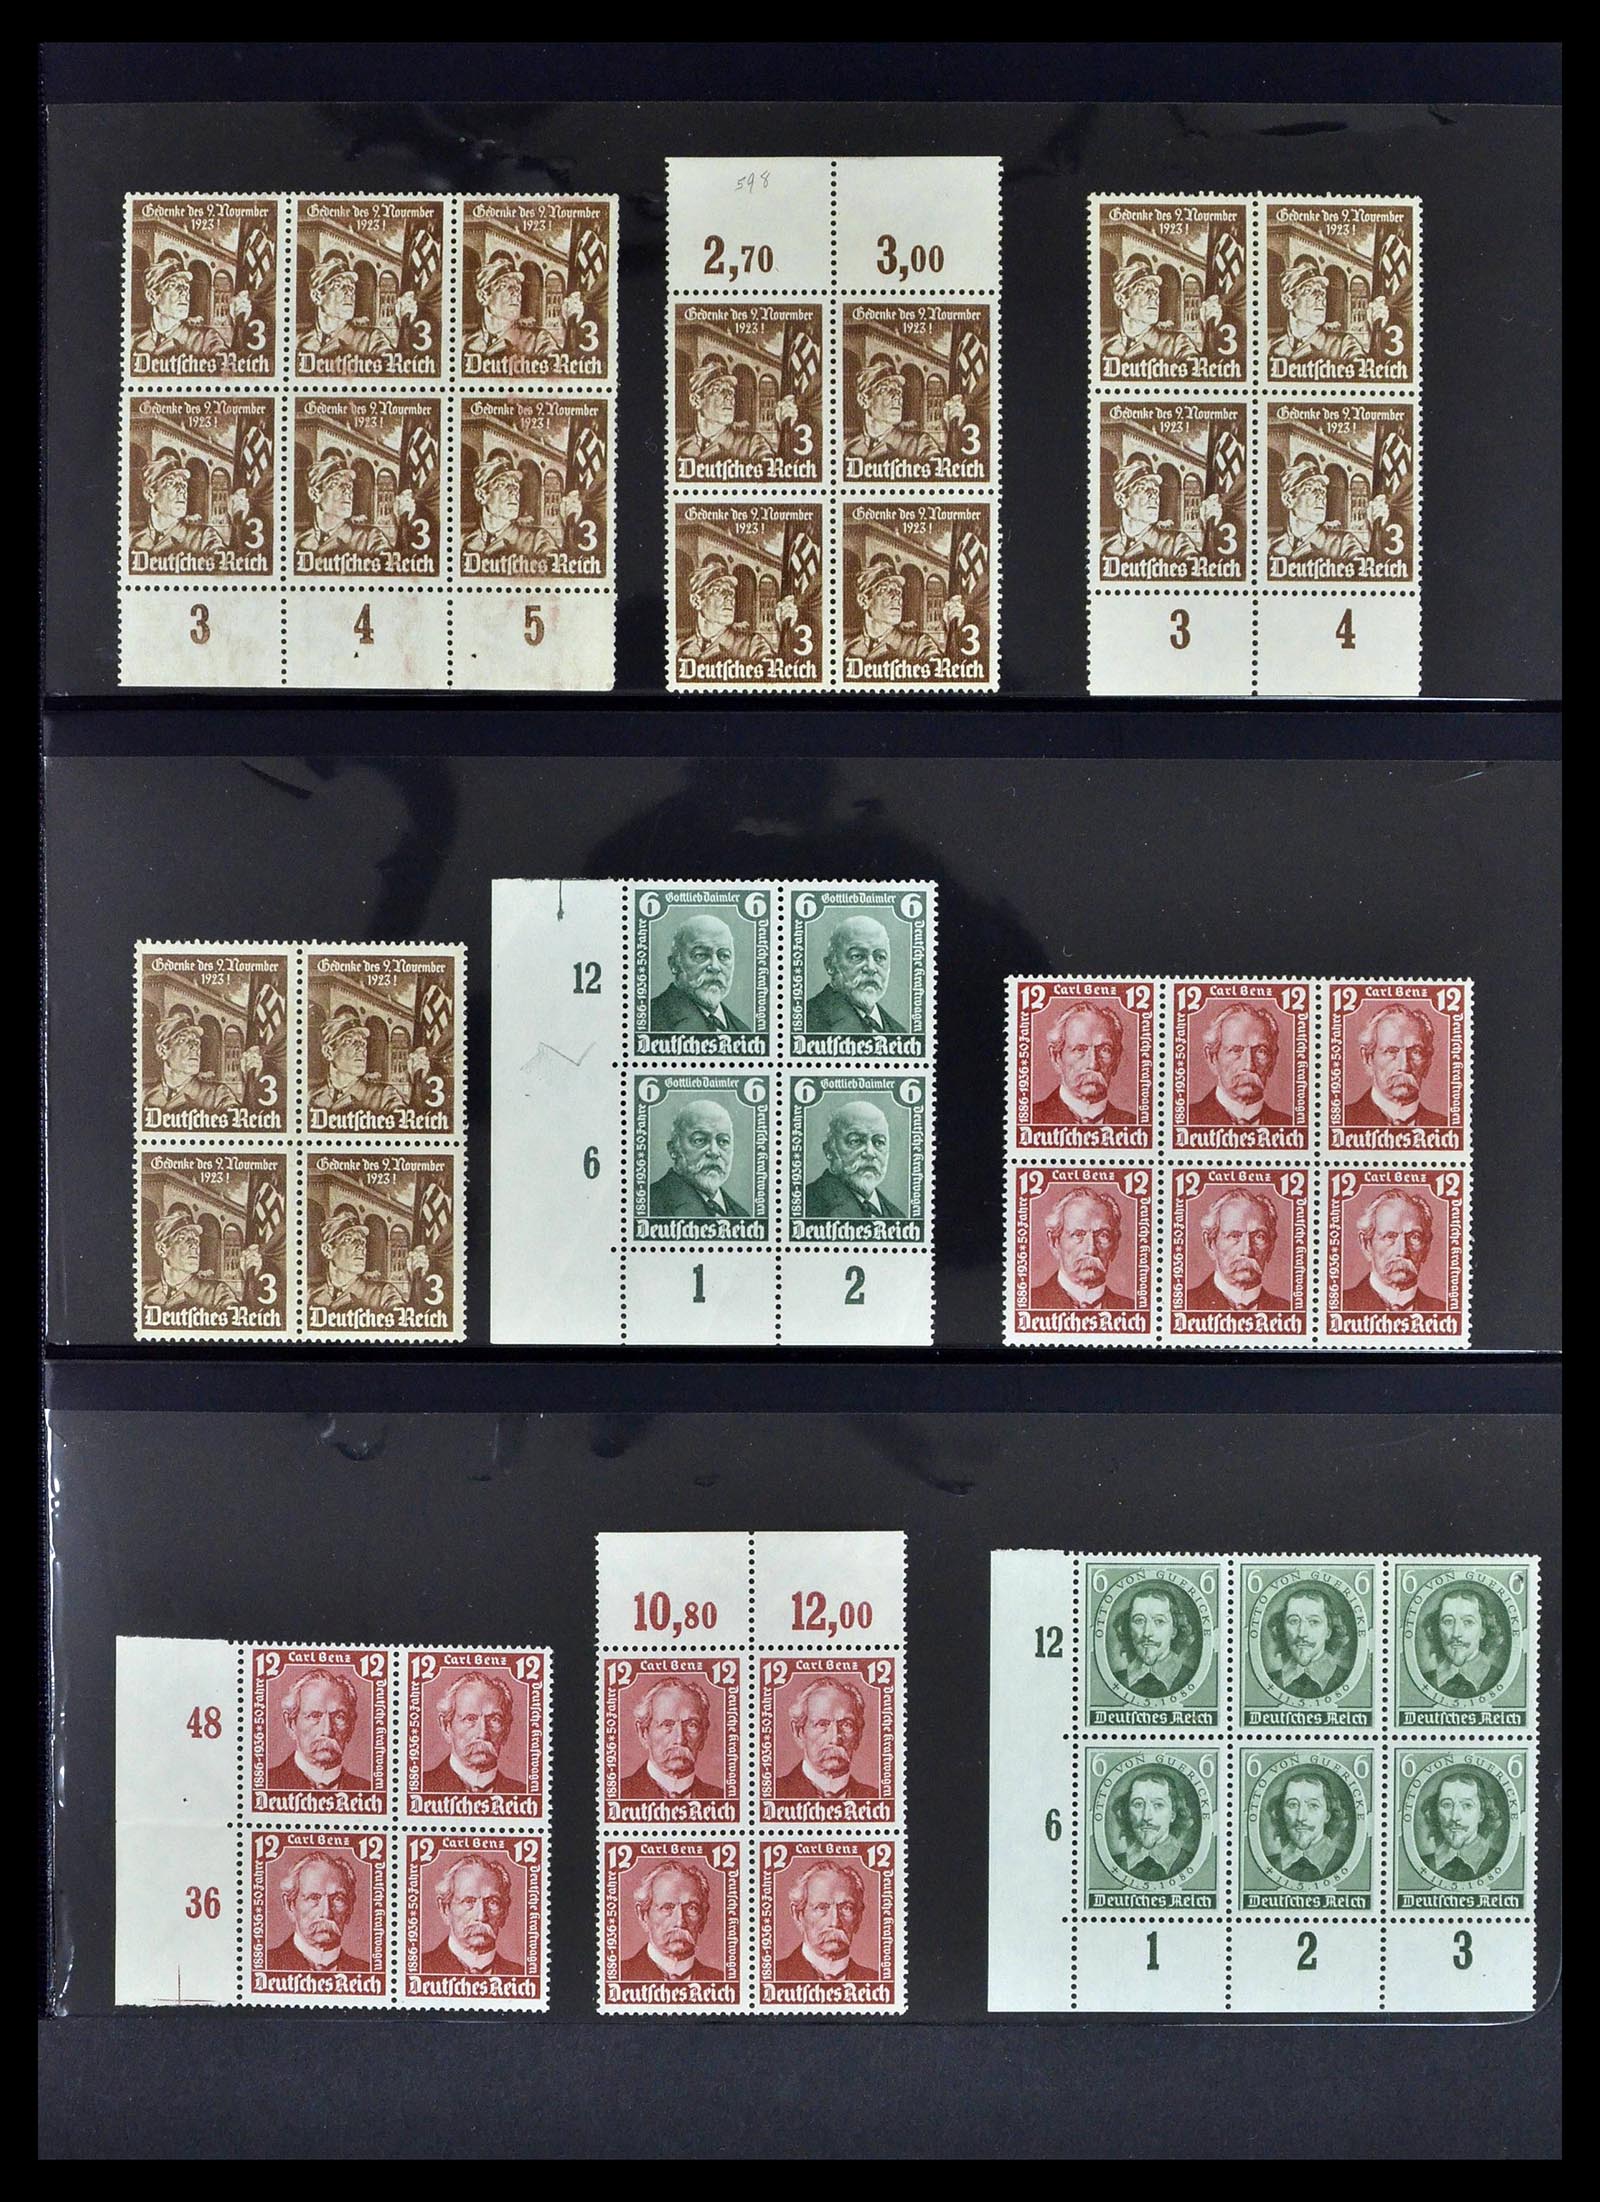 39255 0017 - Stamp collection 39255 German Reich MNH blocks of 4.